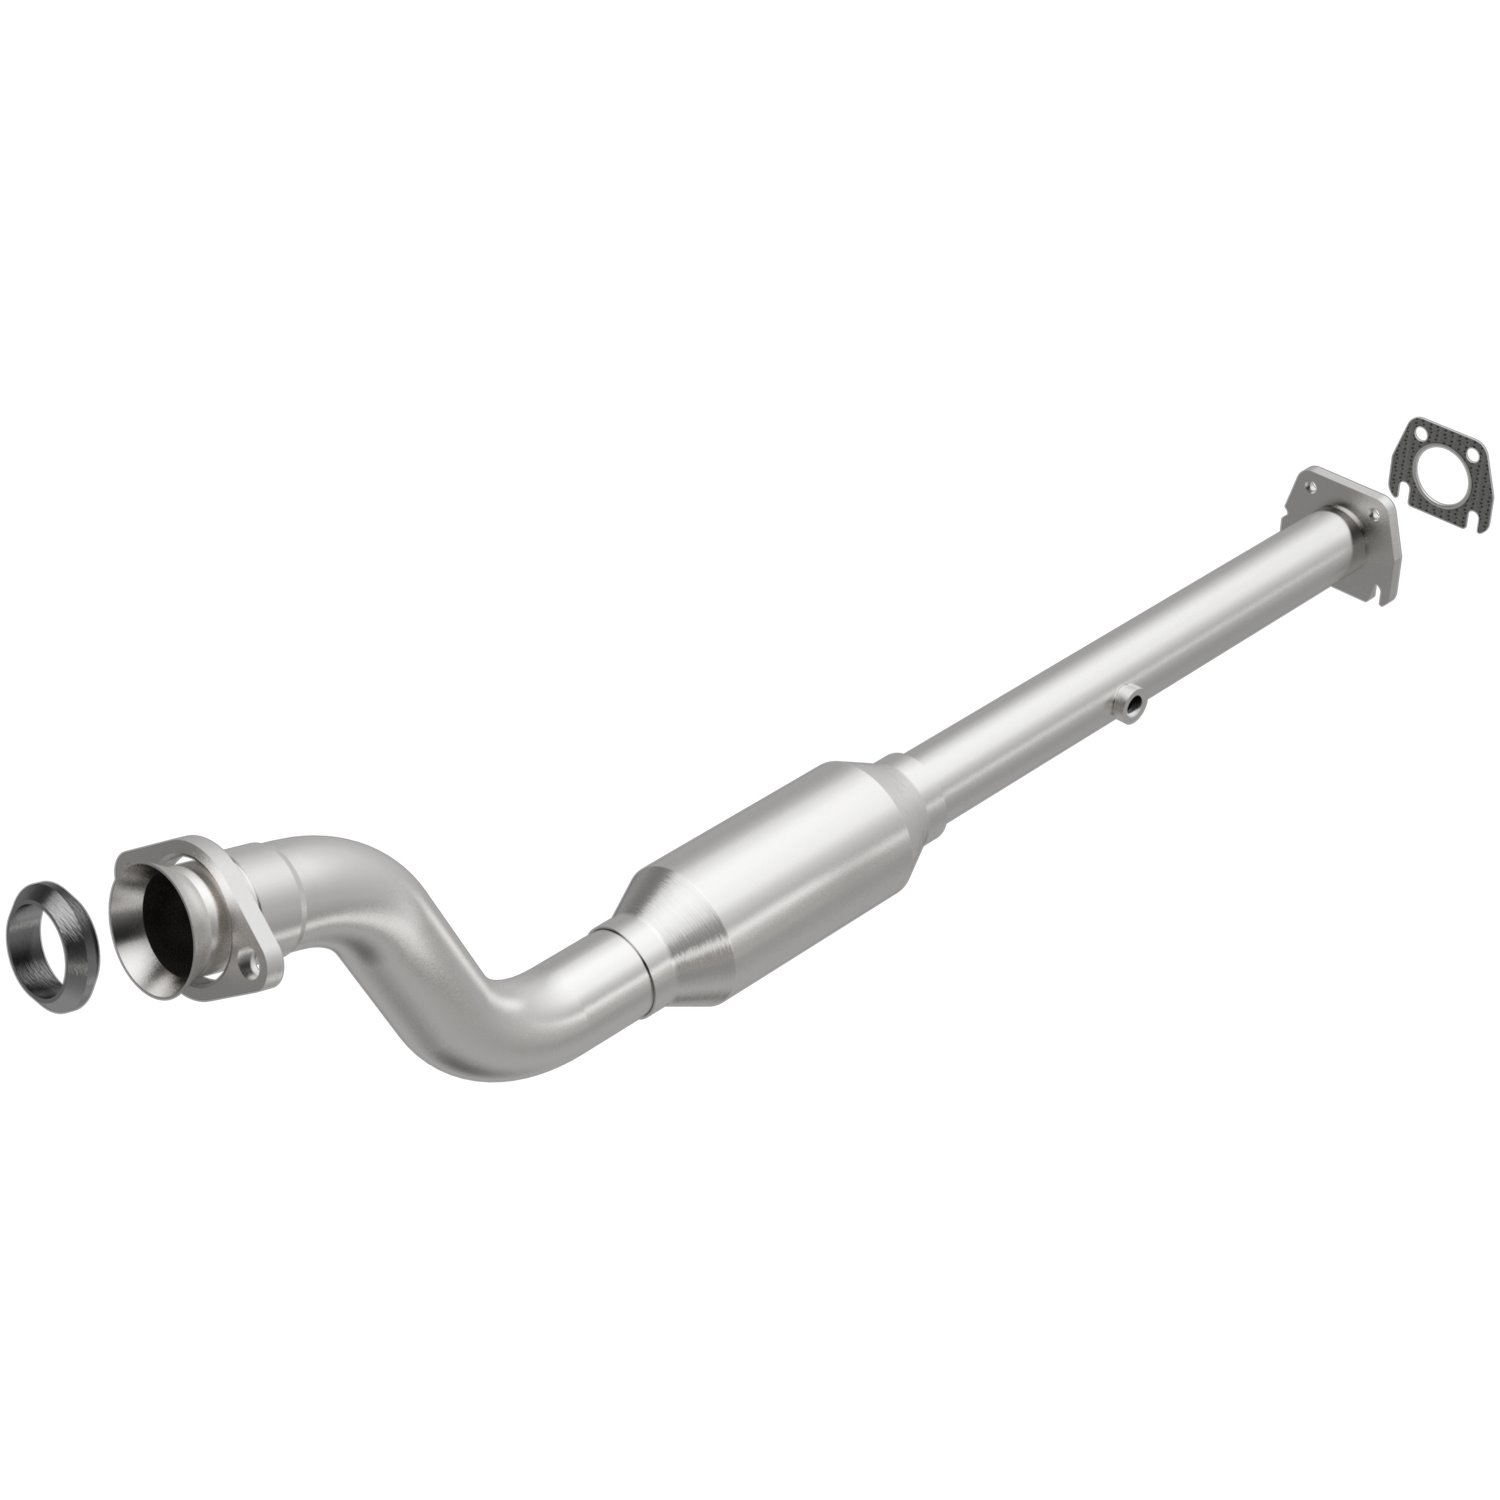 1996 Buick Regal HM Grade Federal / EPA Compliant Direct-Fit Catalytic Converter